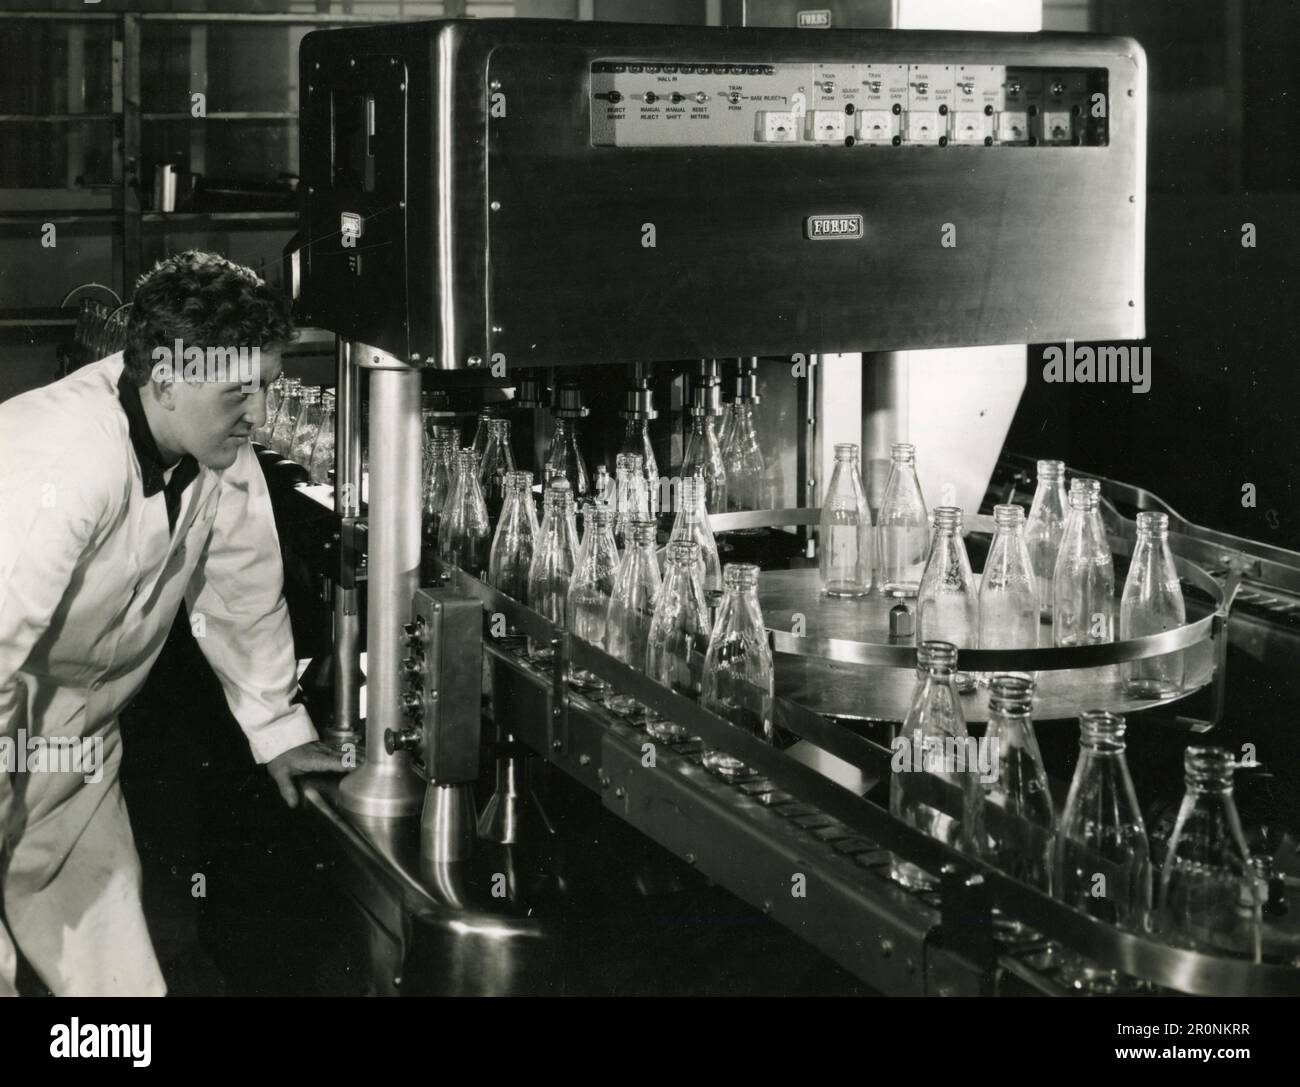 Milk Bootles Passing through the Automatic Bottle Inspection Machine to Detect Defects, UK 1966 Stockfoto